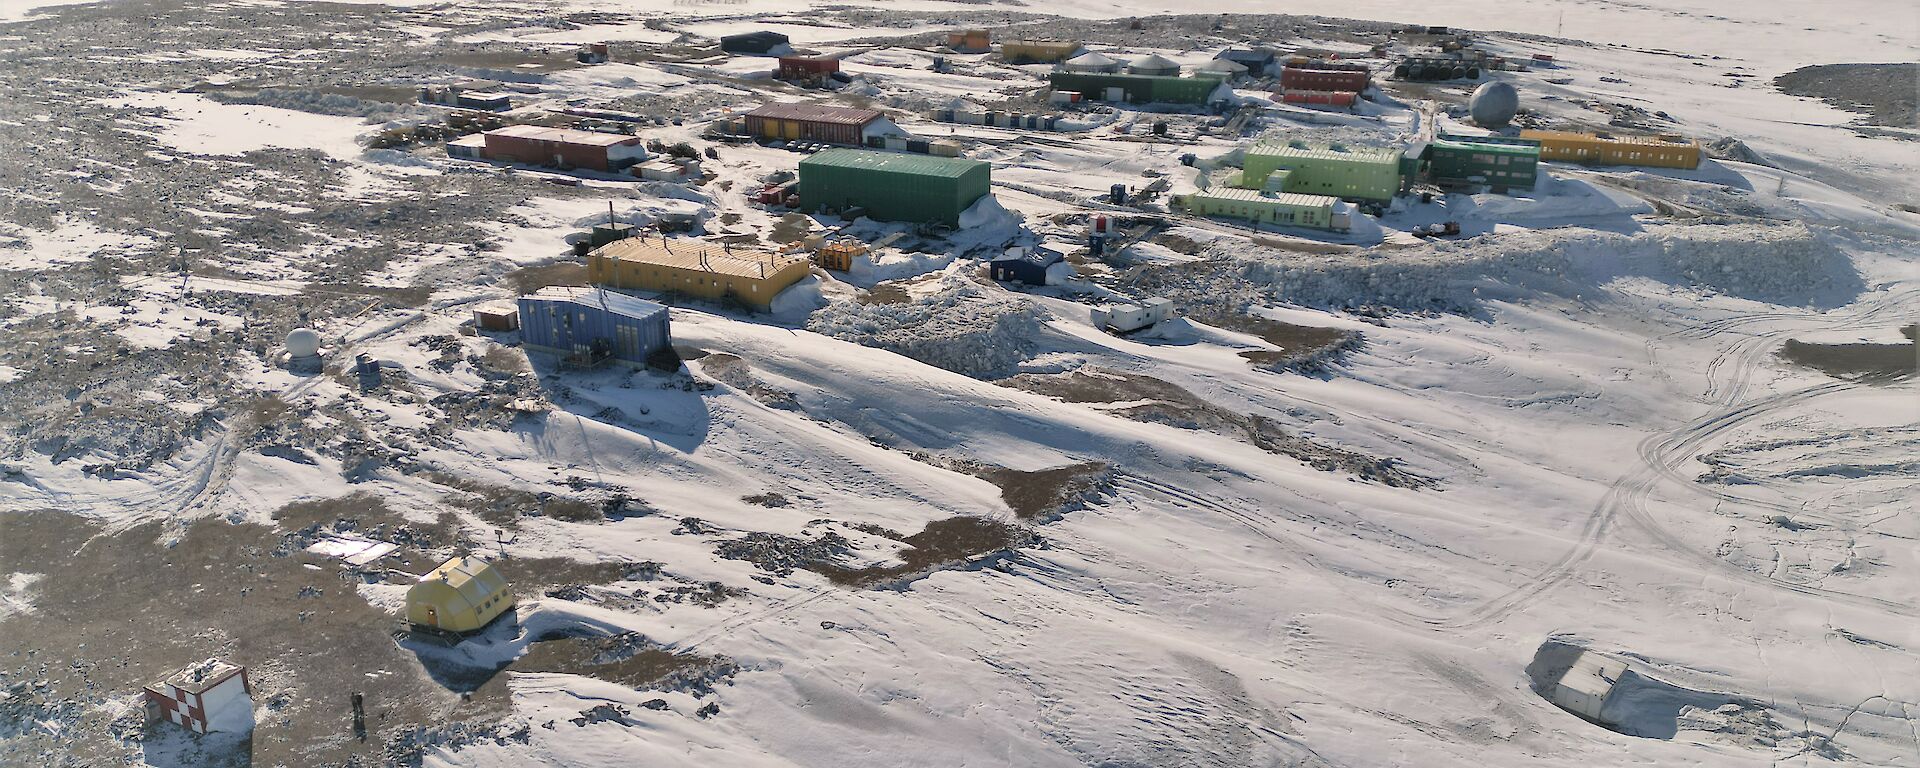 Aerial shot of Davis Station showing numerous coloured buildings set into a snowy and rocky landscape.